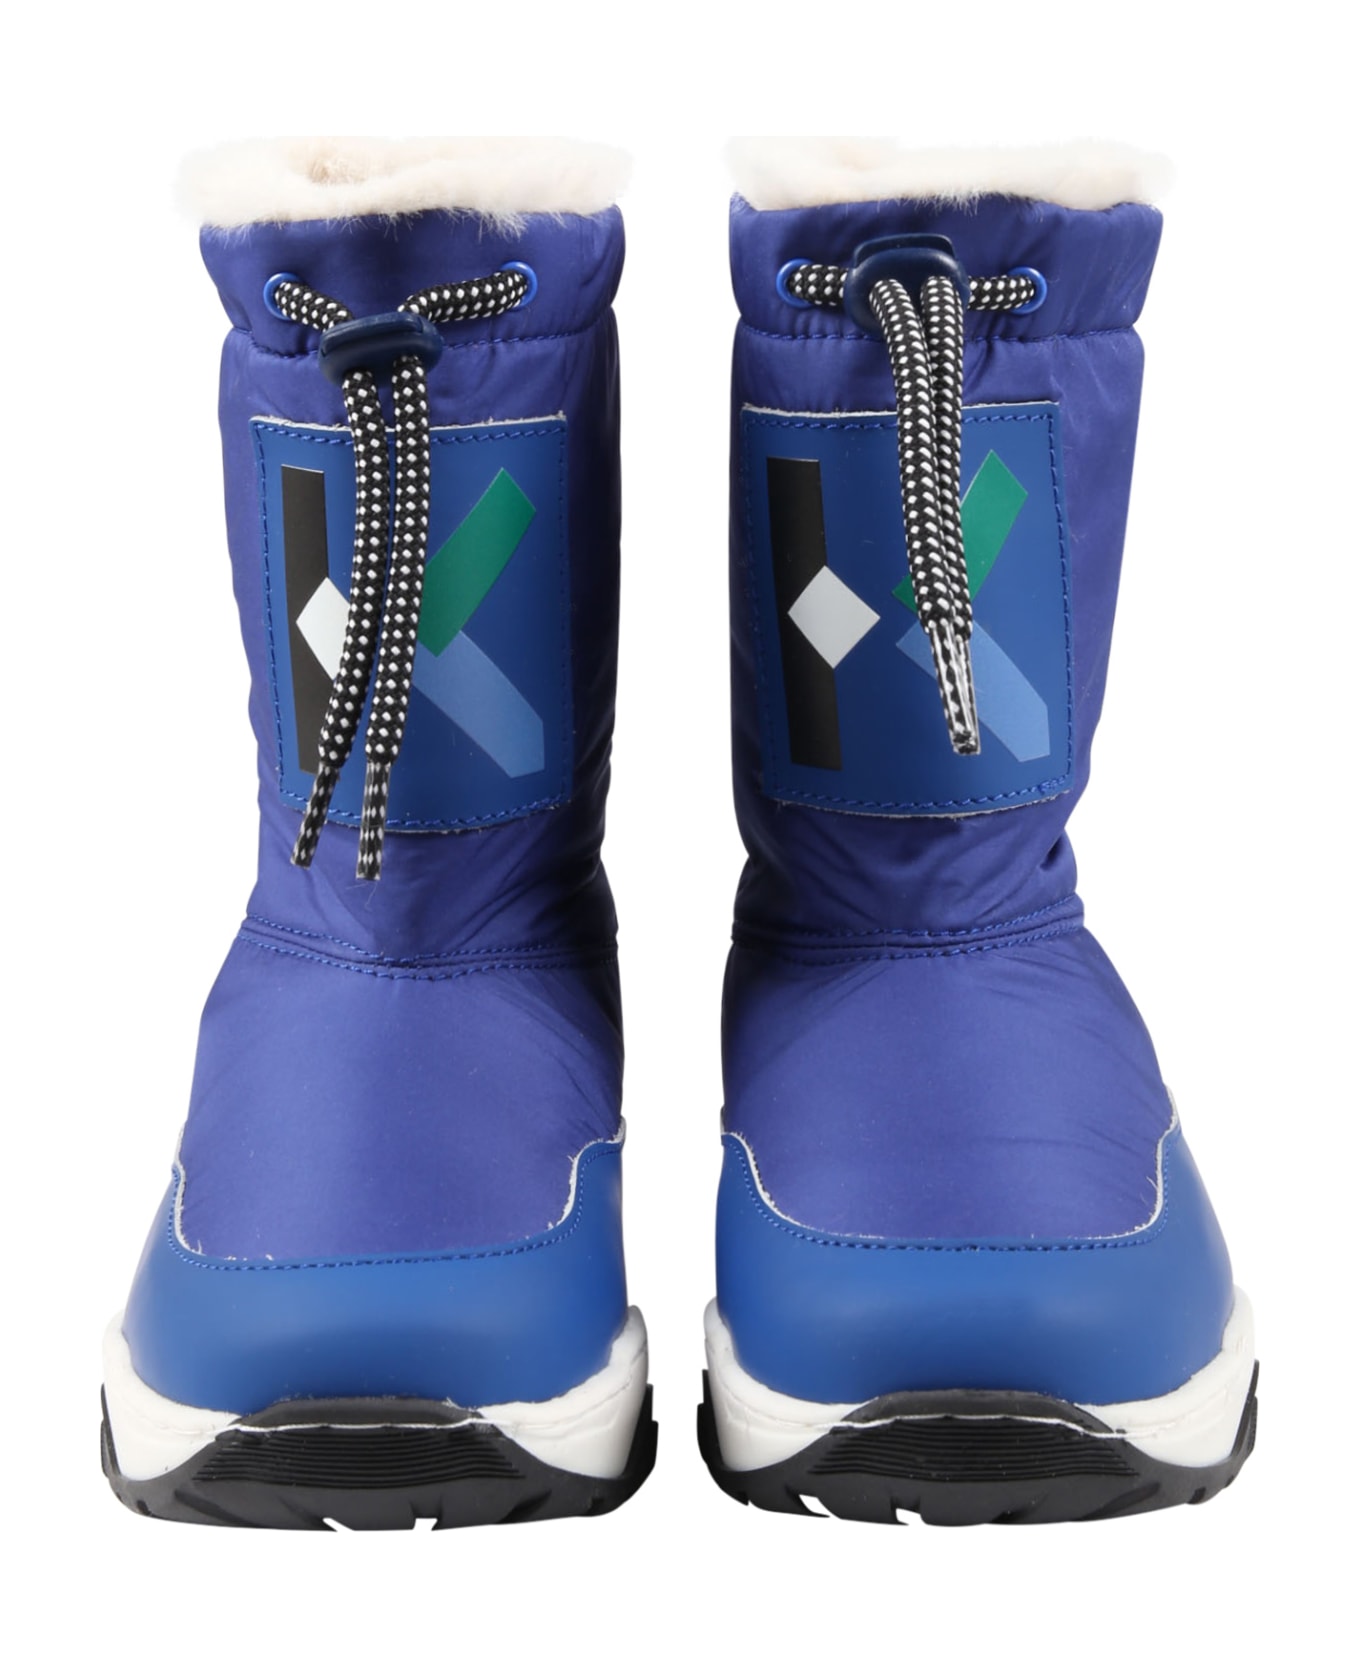 Kenzo Kids Blue Boots For Boy With Logo - Blue